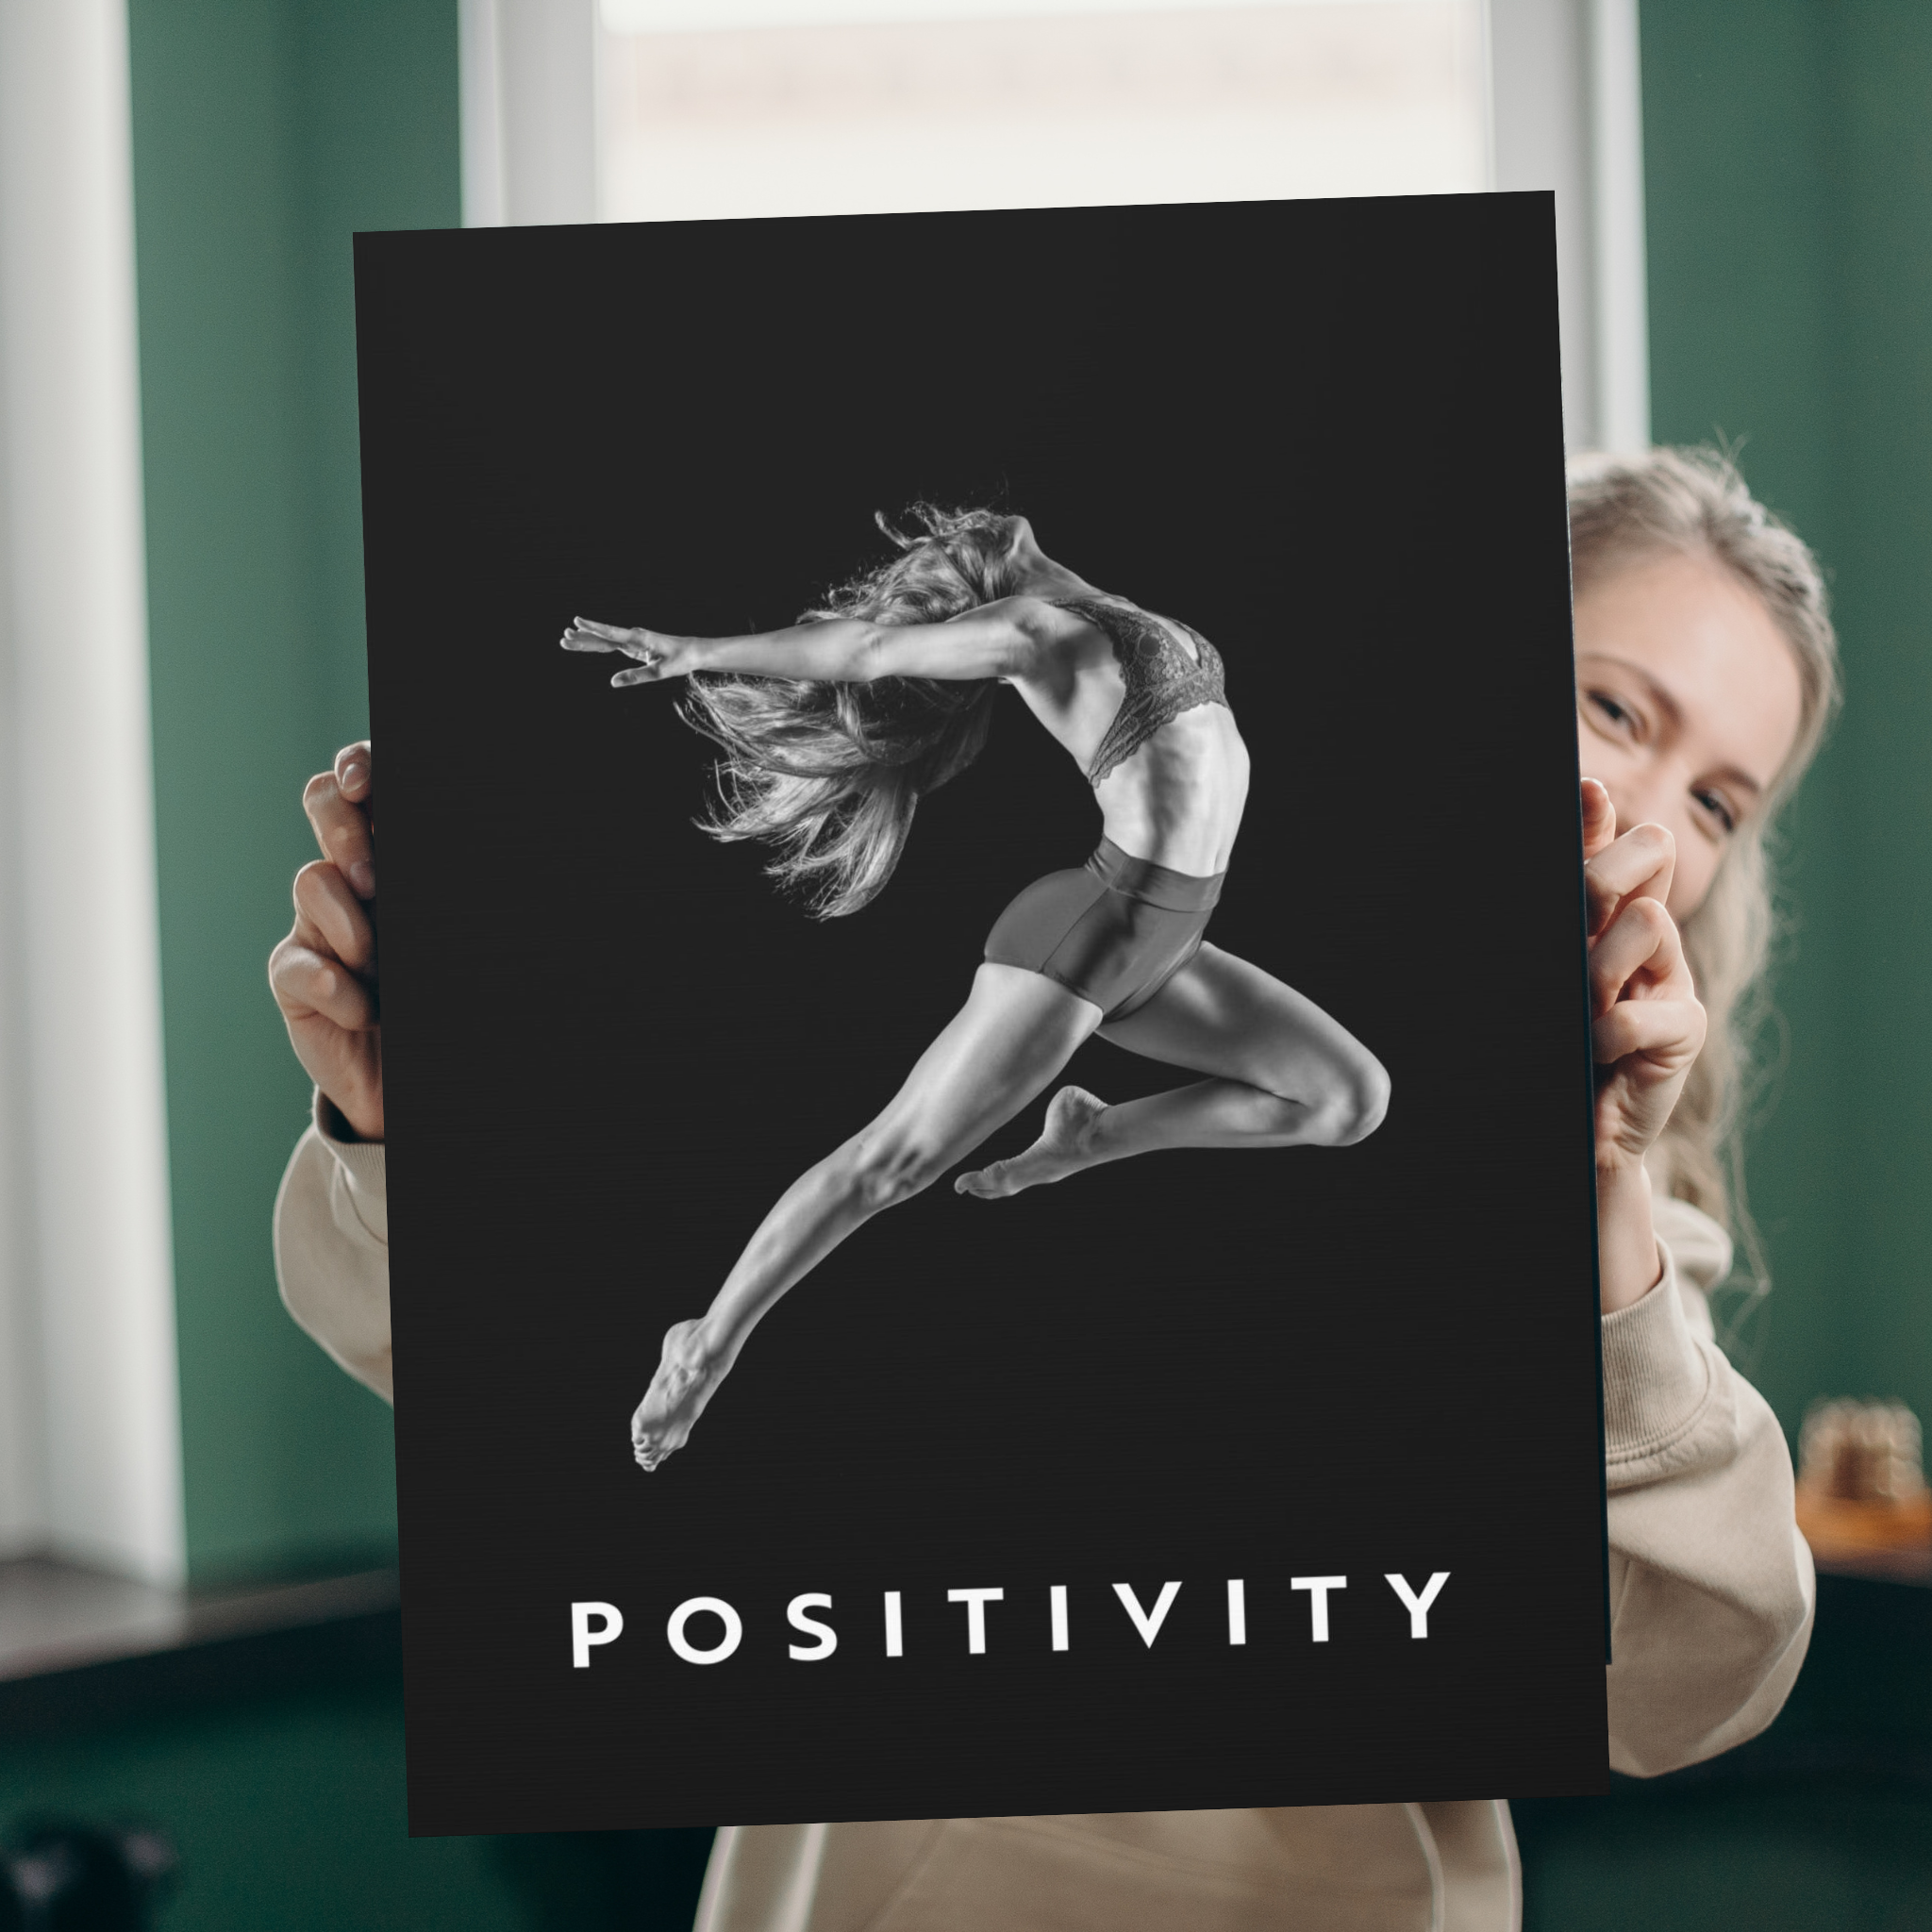 Positivity - Airborne Black And White - Wall Art additional image 1